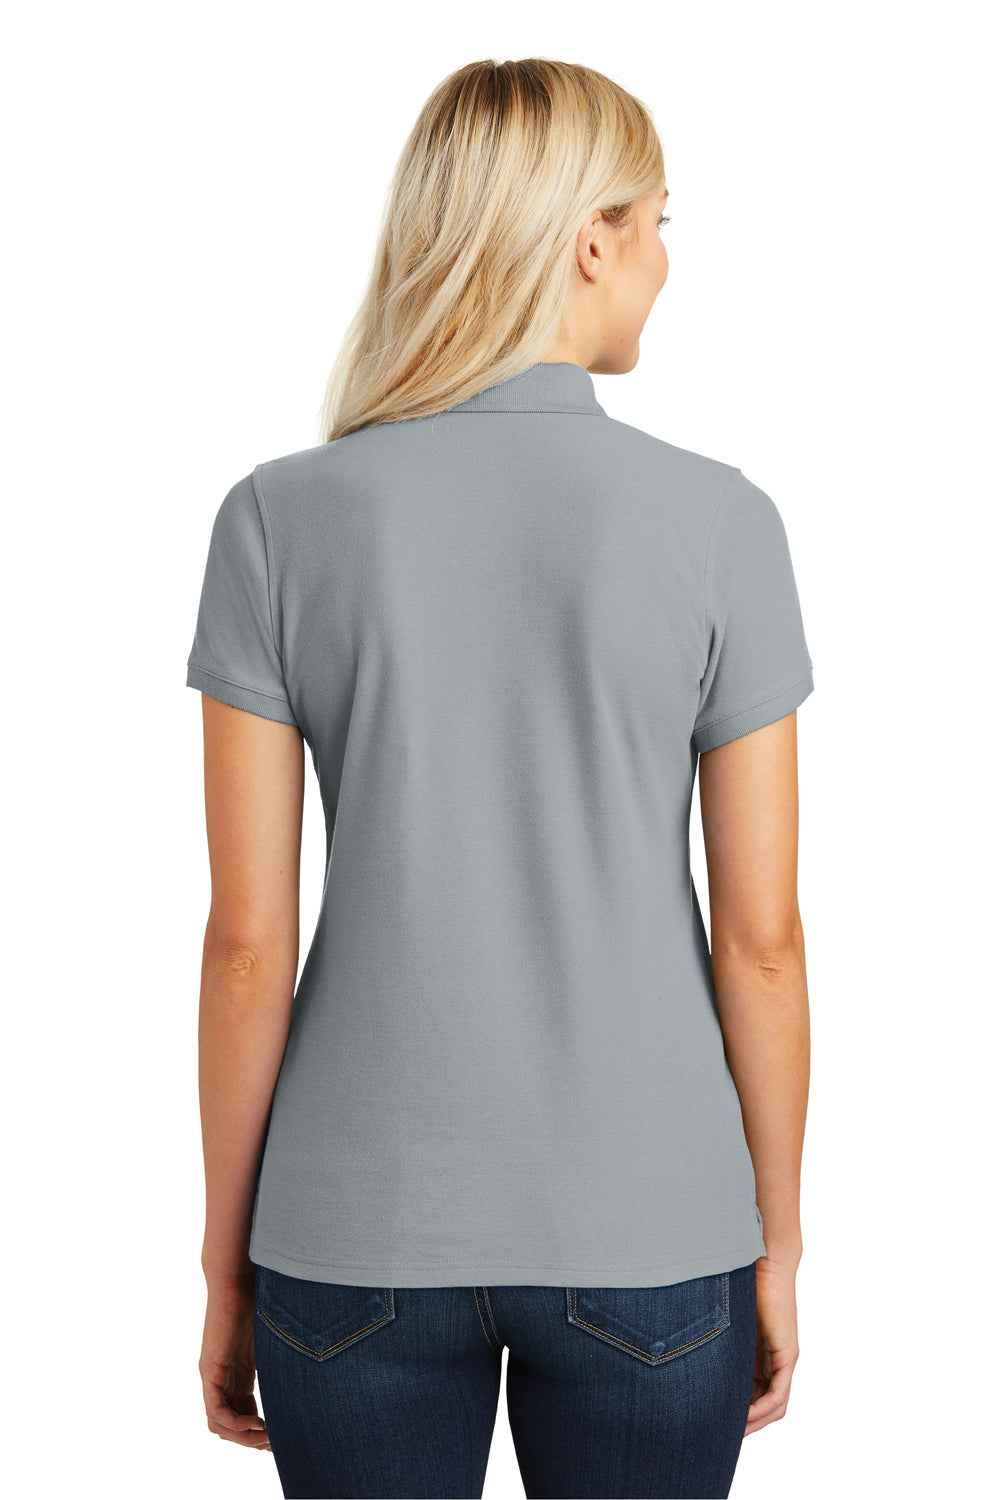 Port Authority L100 Womens Core Classic Short Sleeve Polo Shirt Grey Back